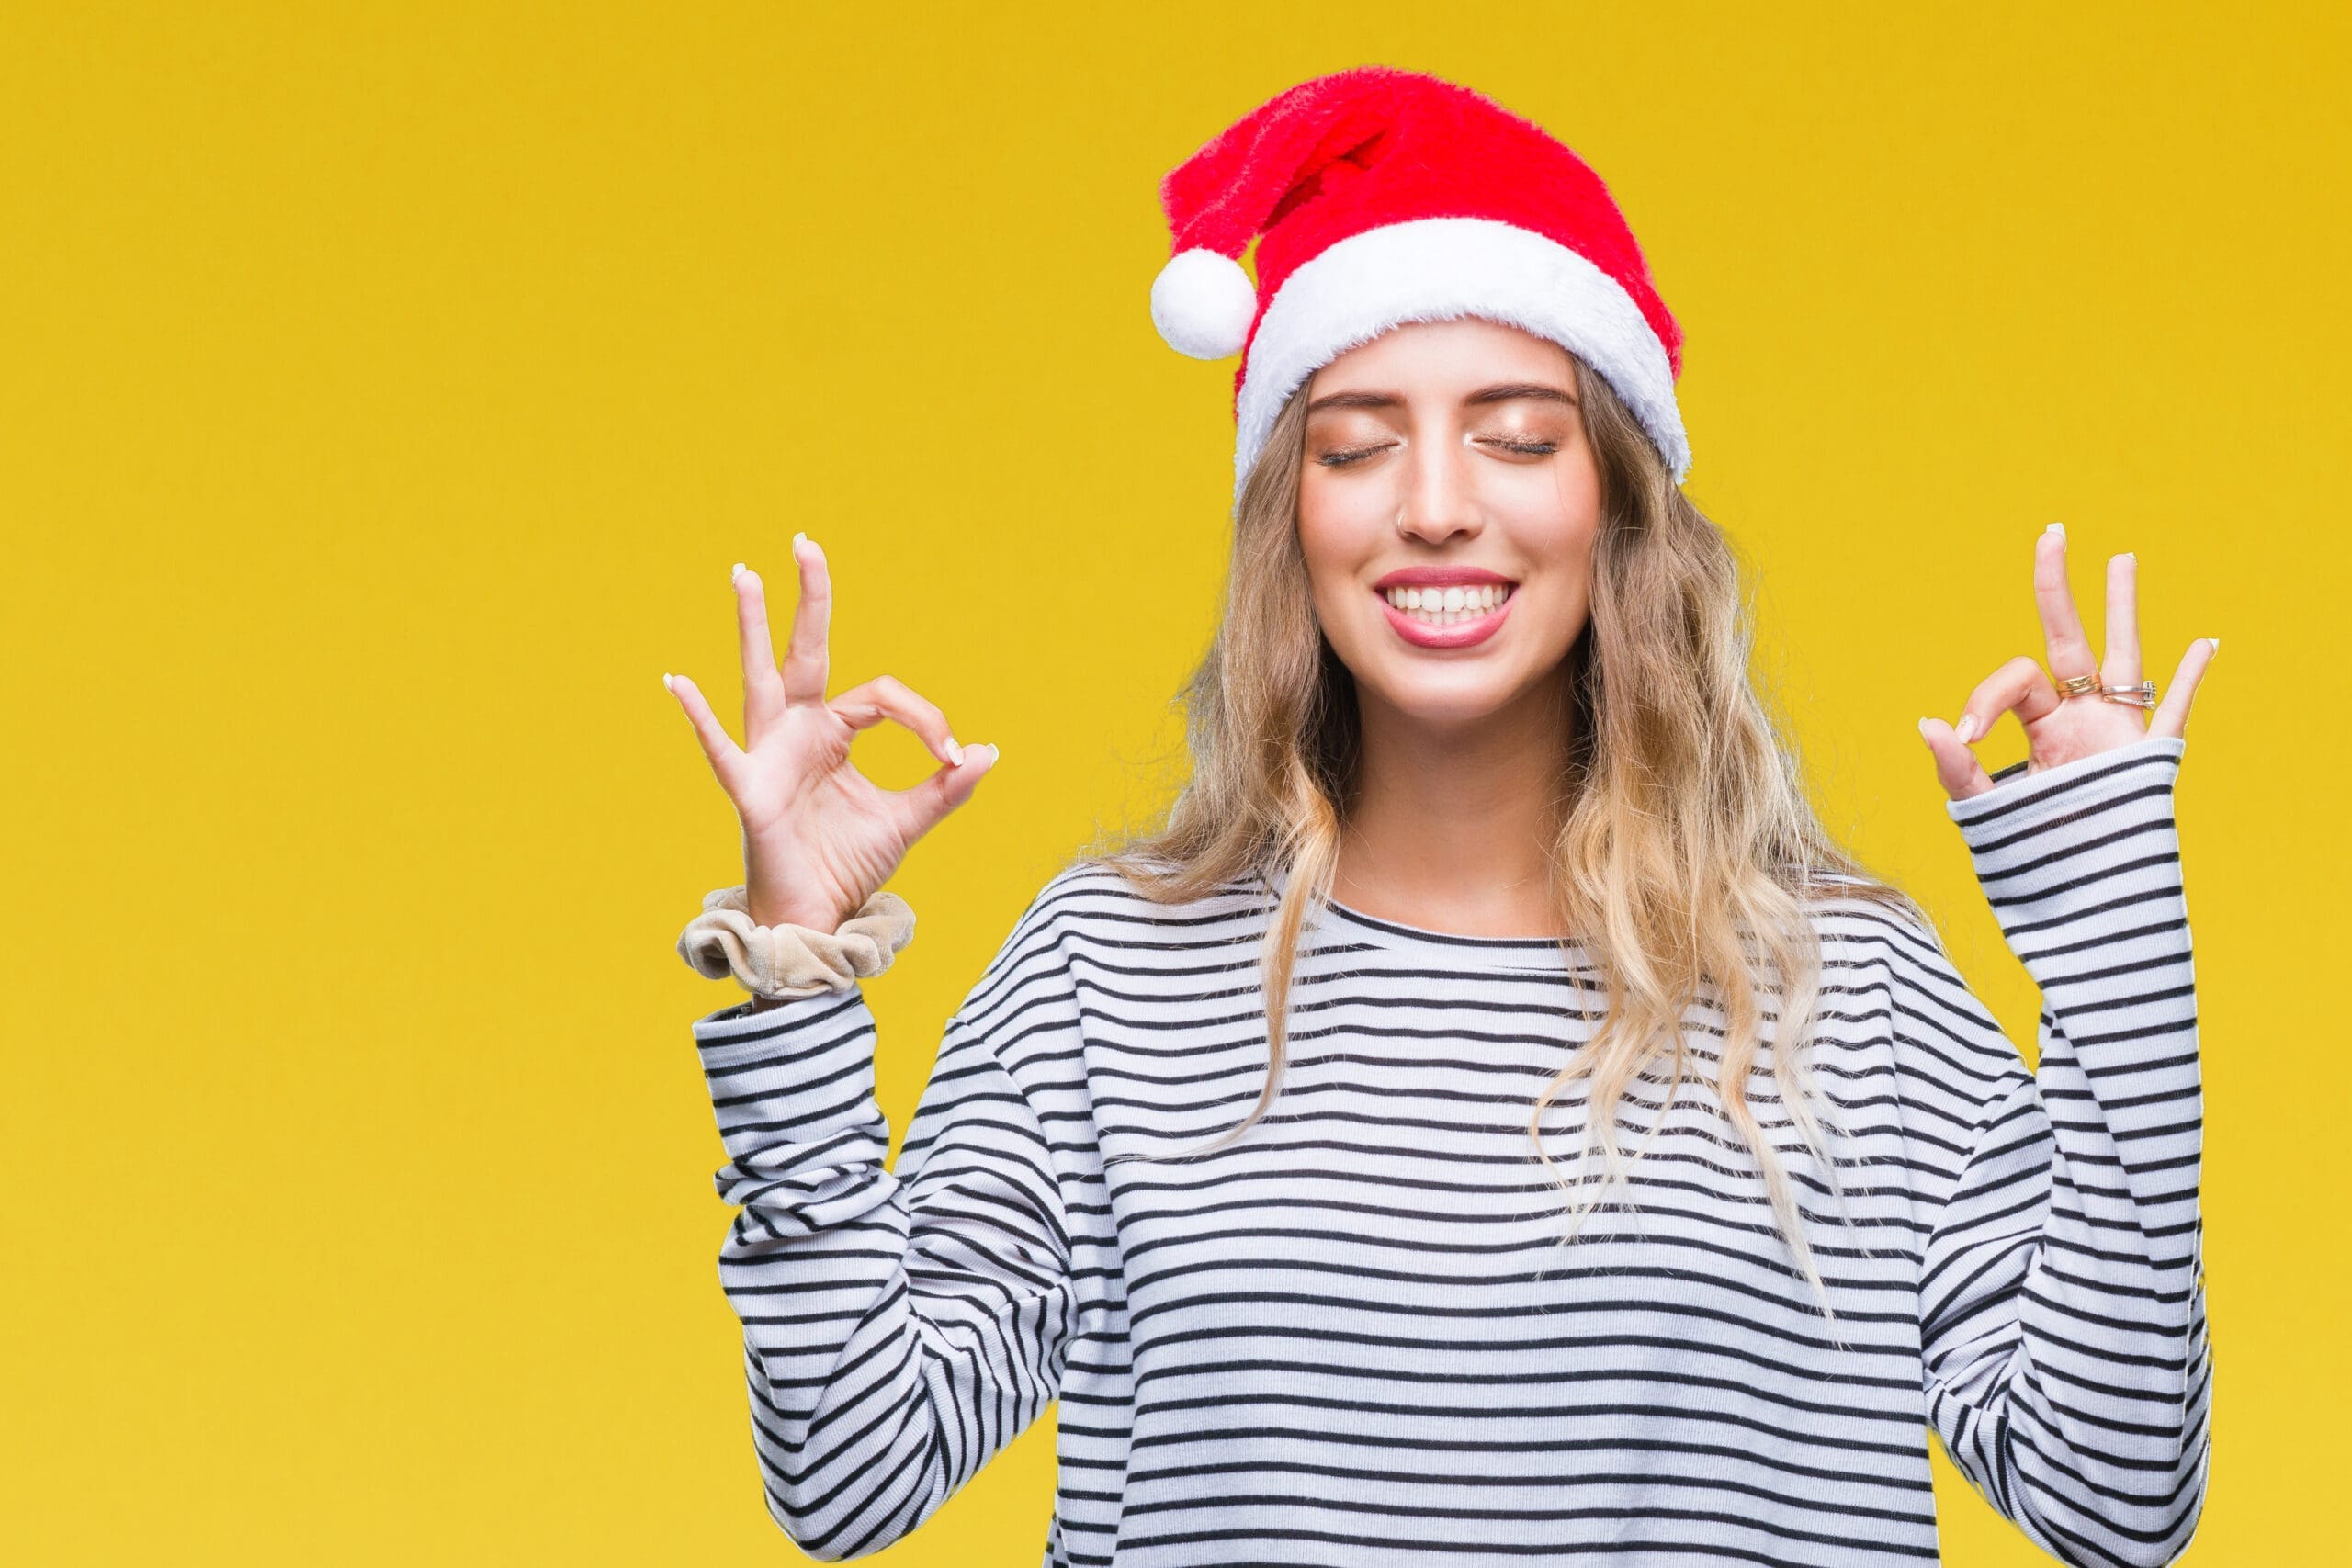 10 Rules to Reduce Christmas Stress